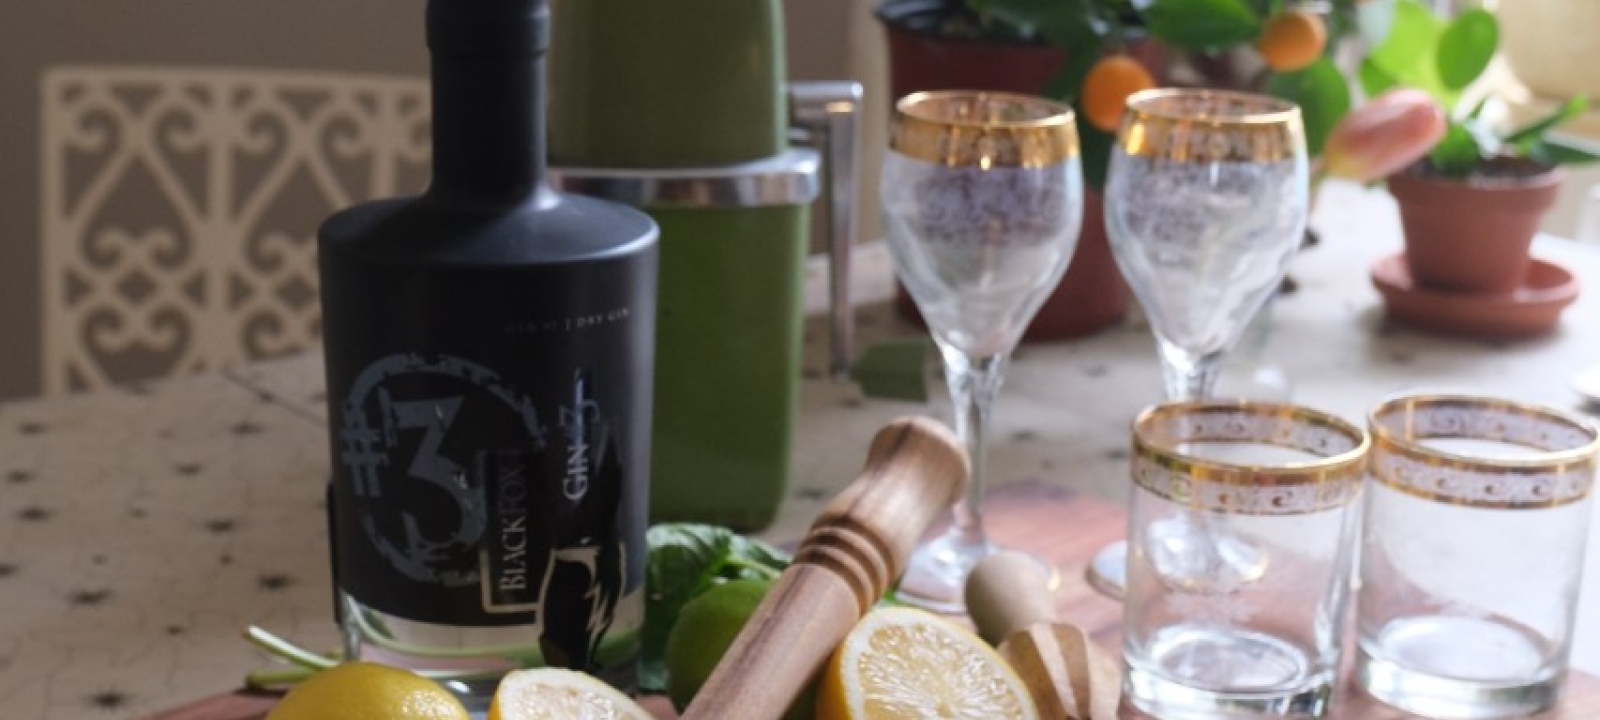 Cocktail Recipes to Try at Home: Black Fox Gin